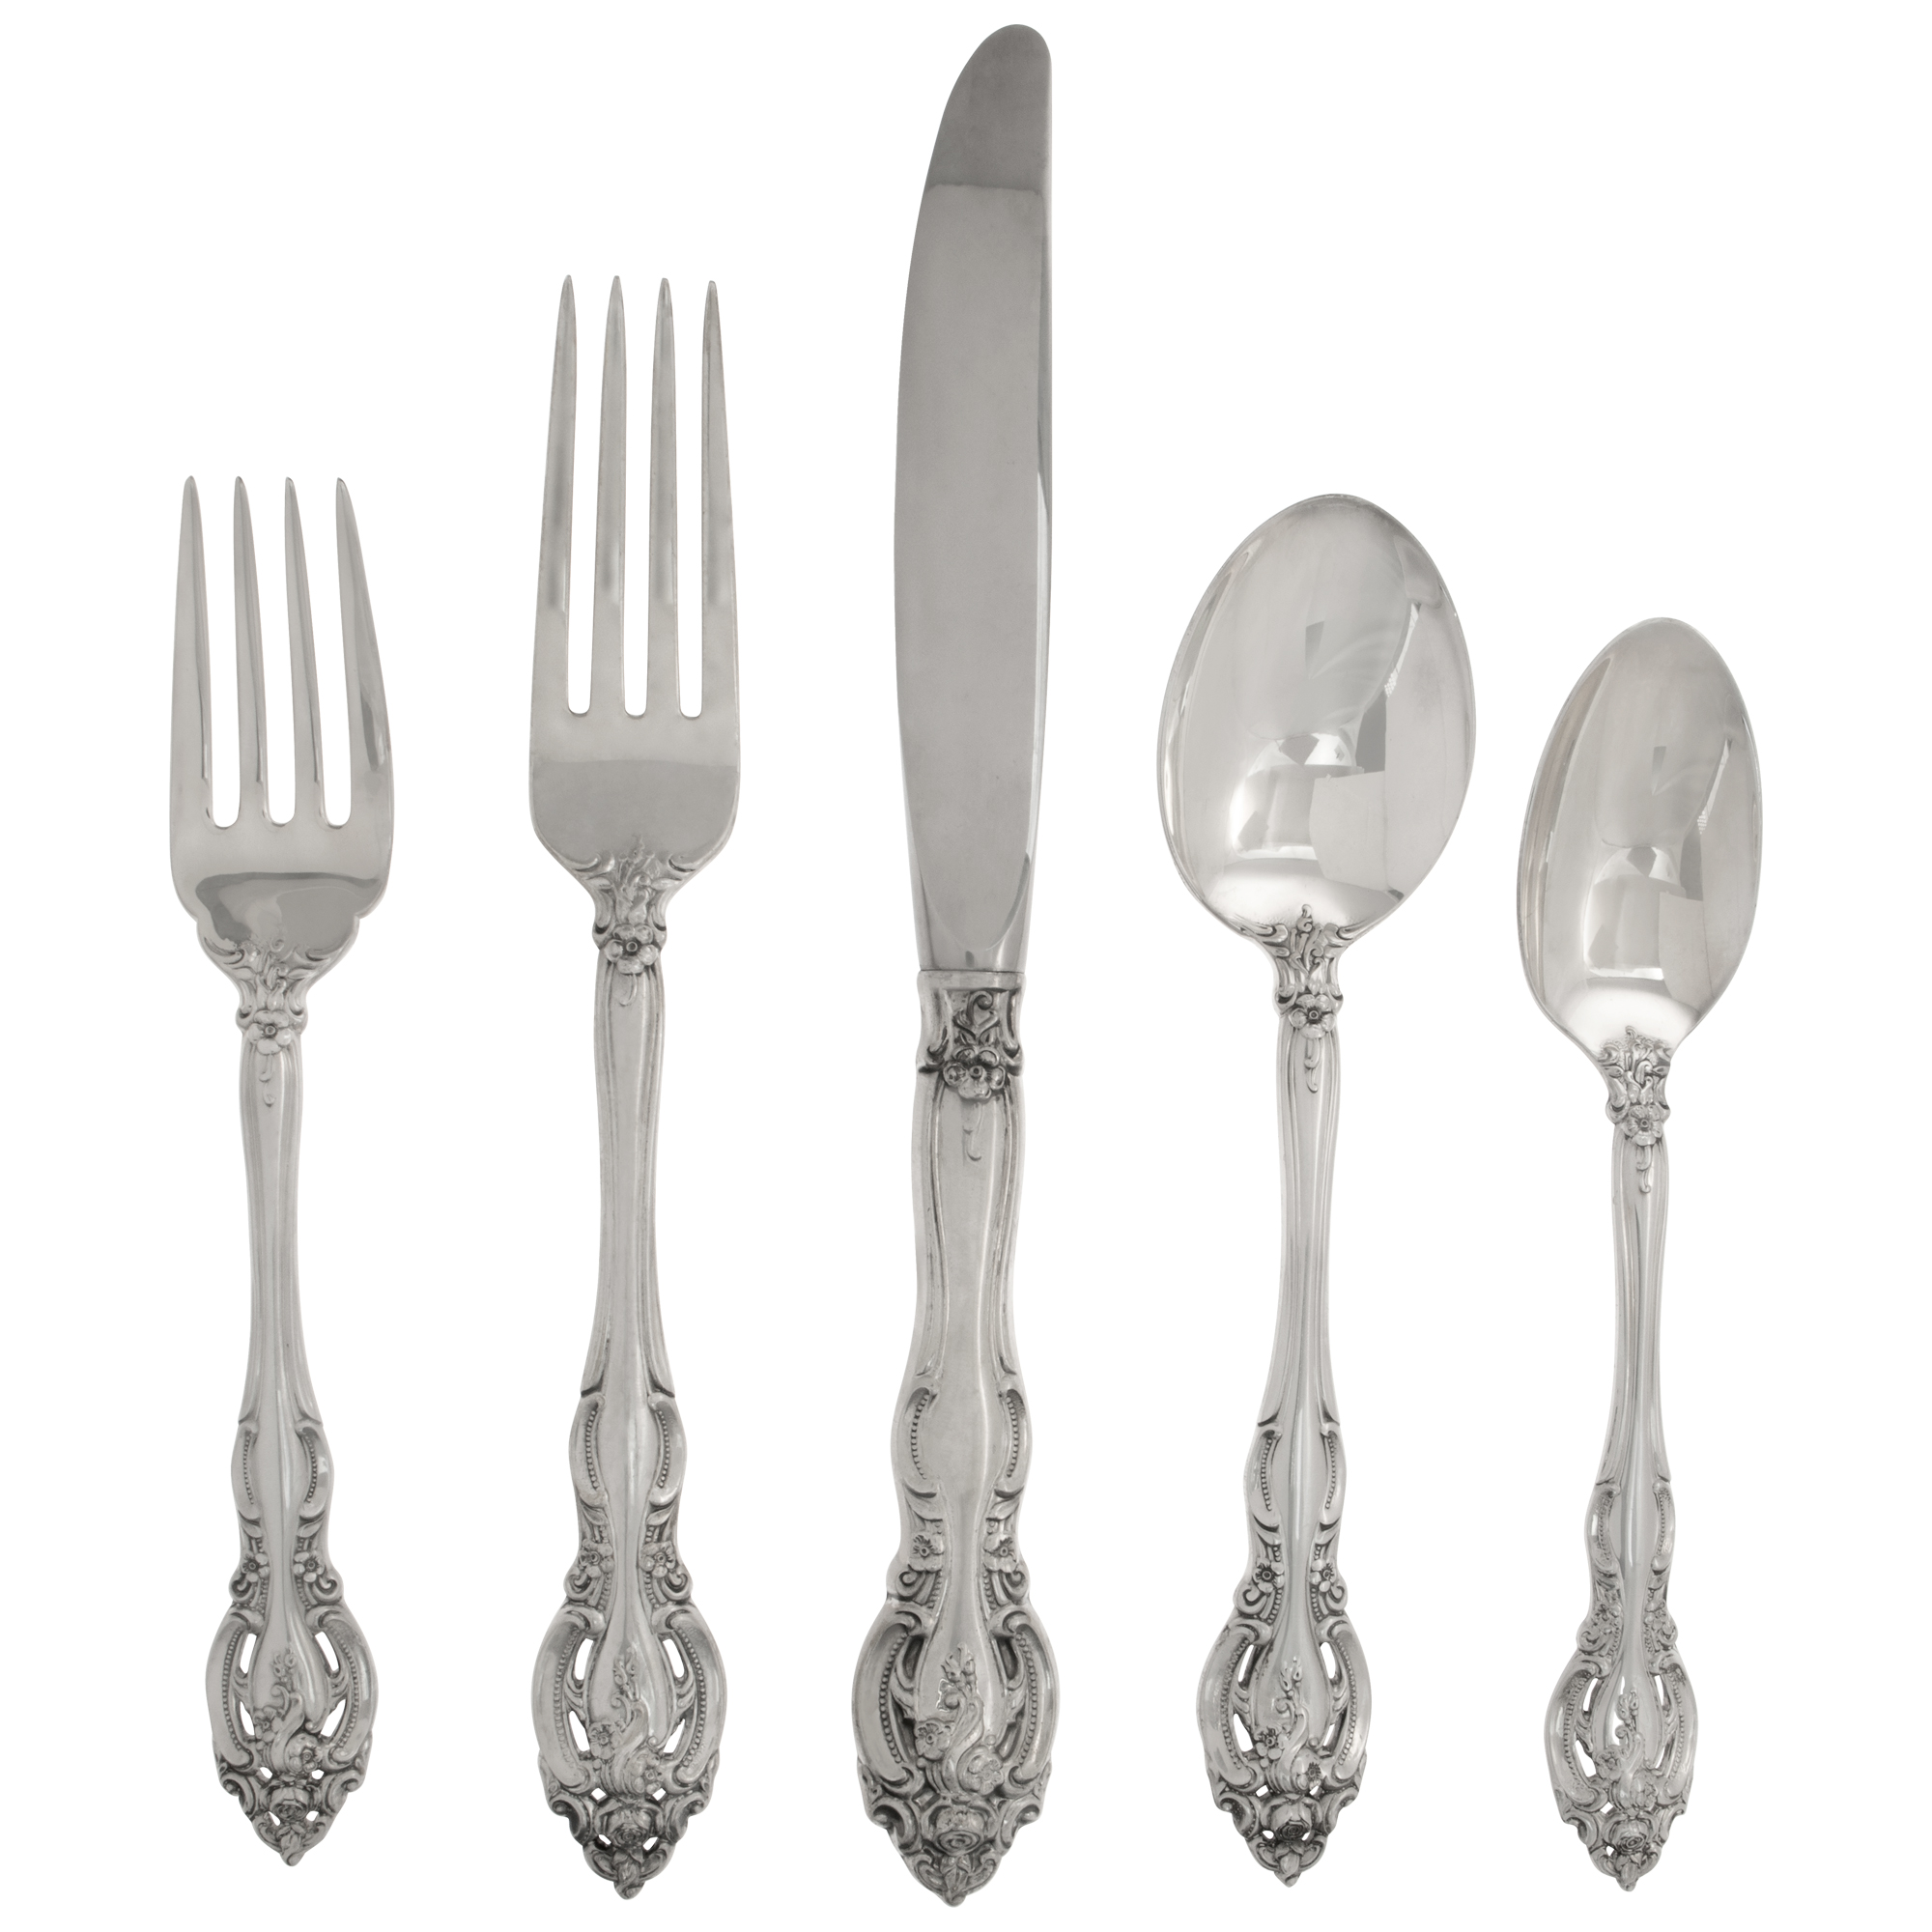 LA SCALA Gorham Sterling Silver flatware, patented in 1964. TOTAL: 21 pieces. 5 Place setting for 4 with one serving piece.